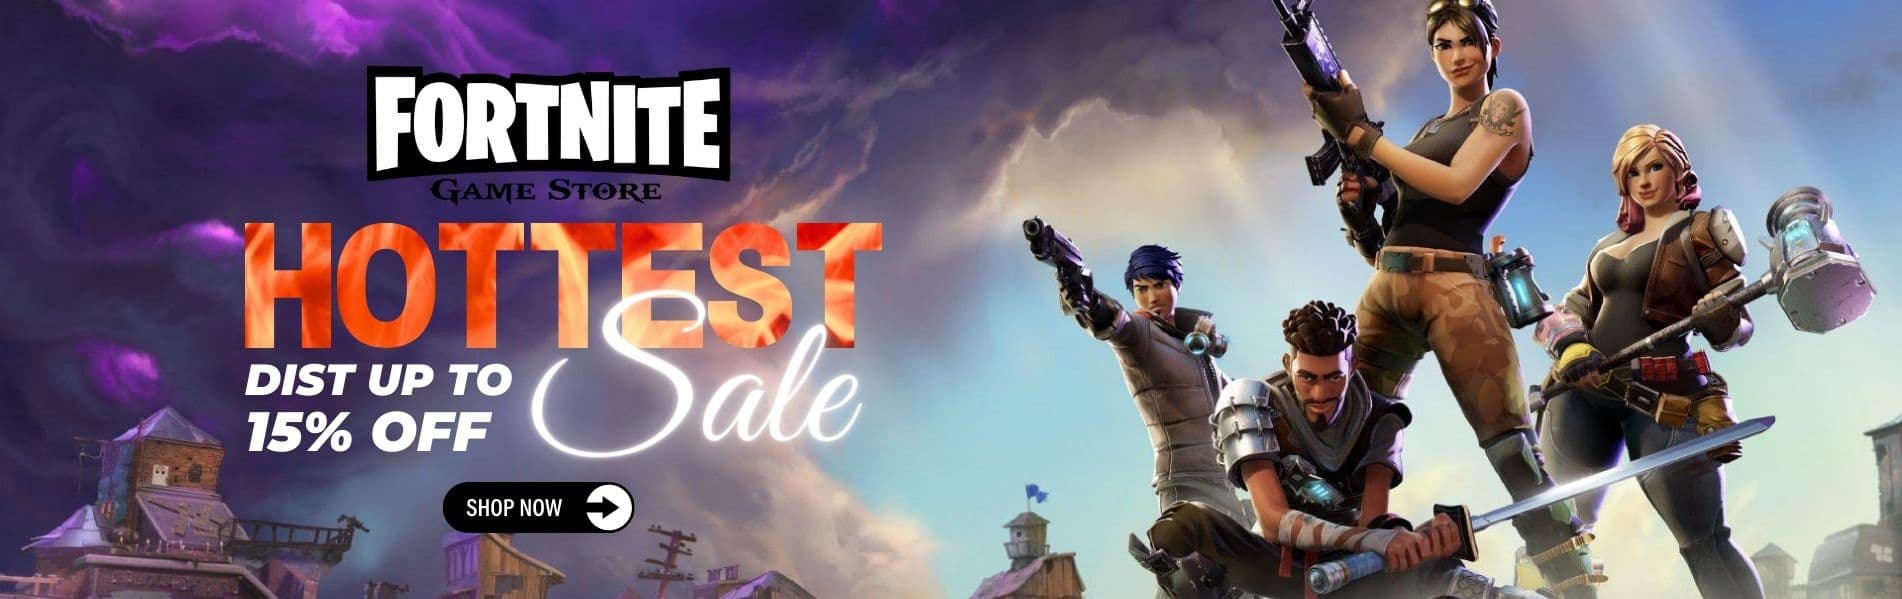 Fornite Game Store Banner